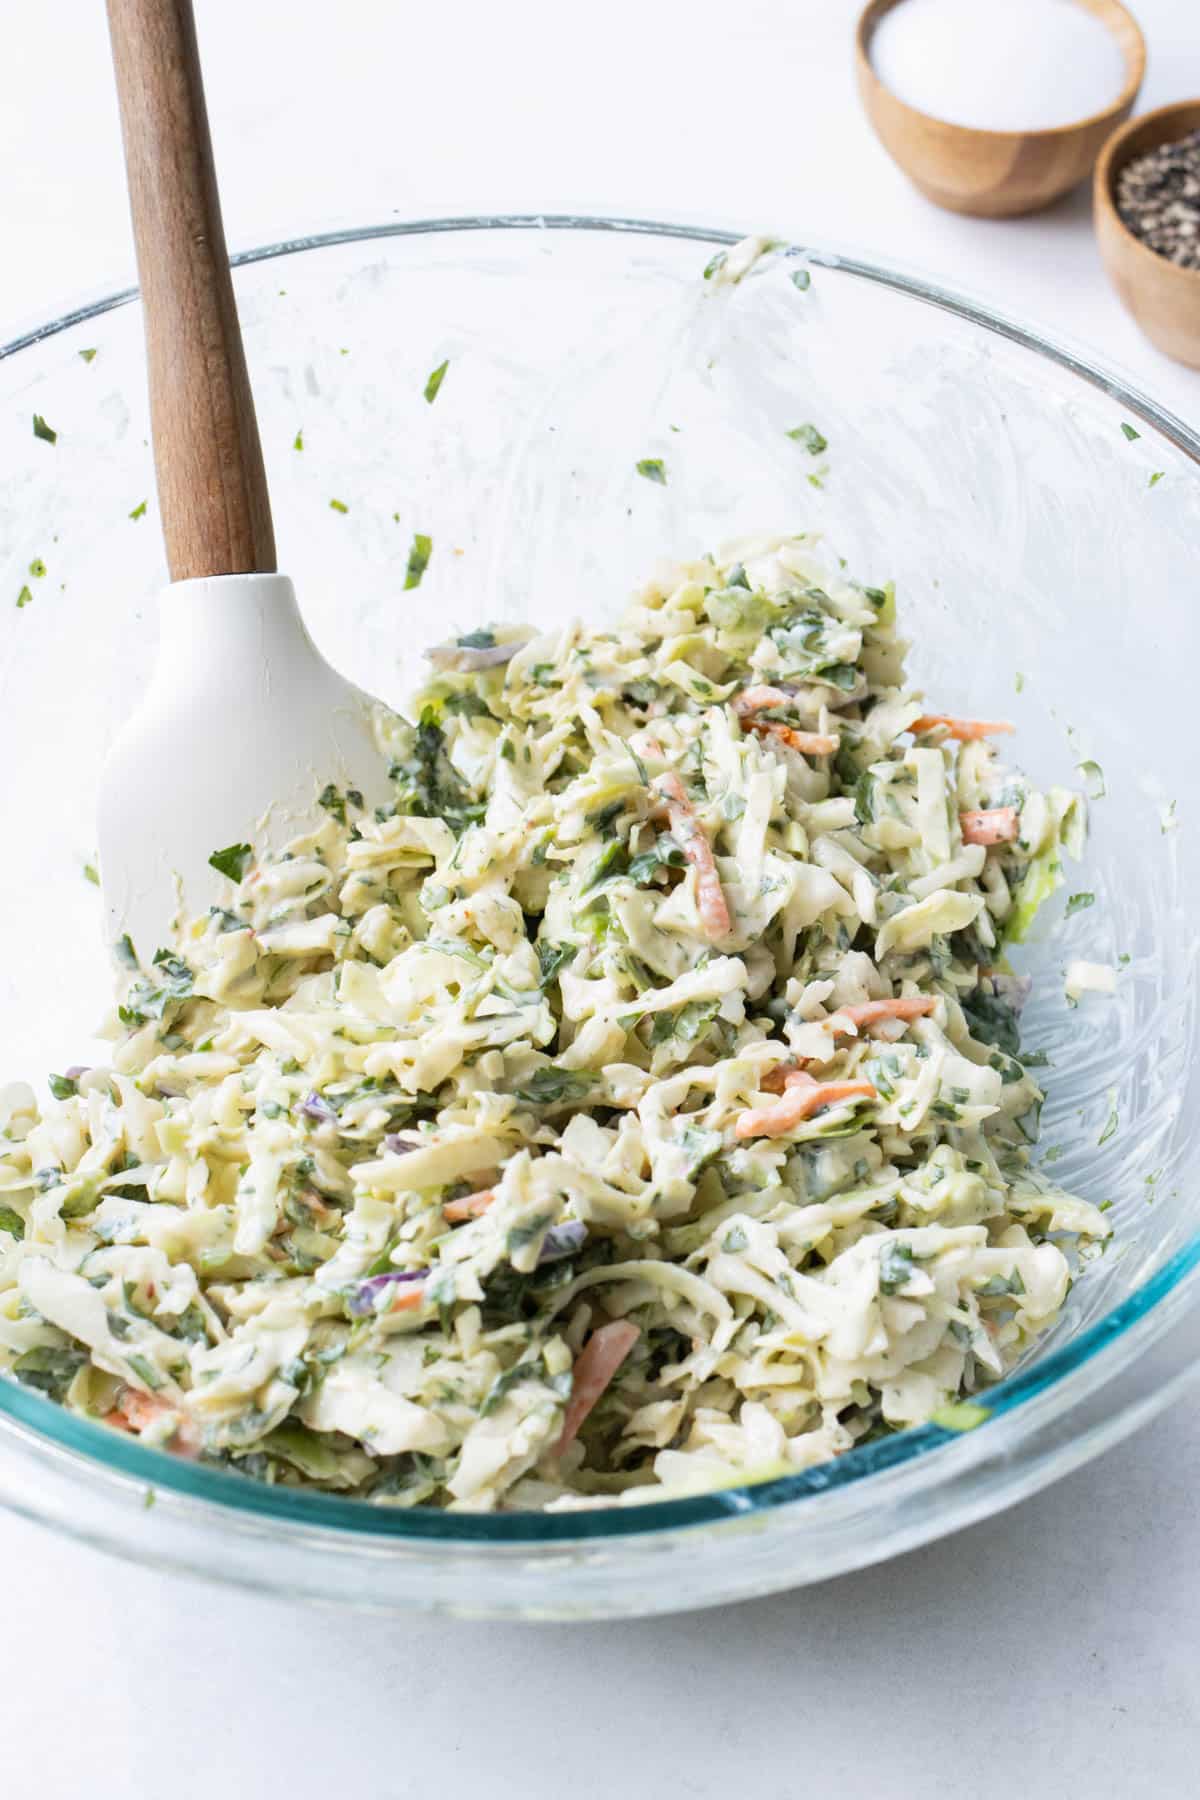 The cilantro coleslaw mix is stirred together.